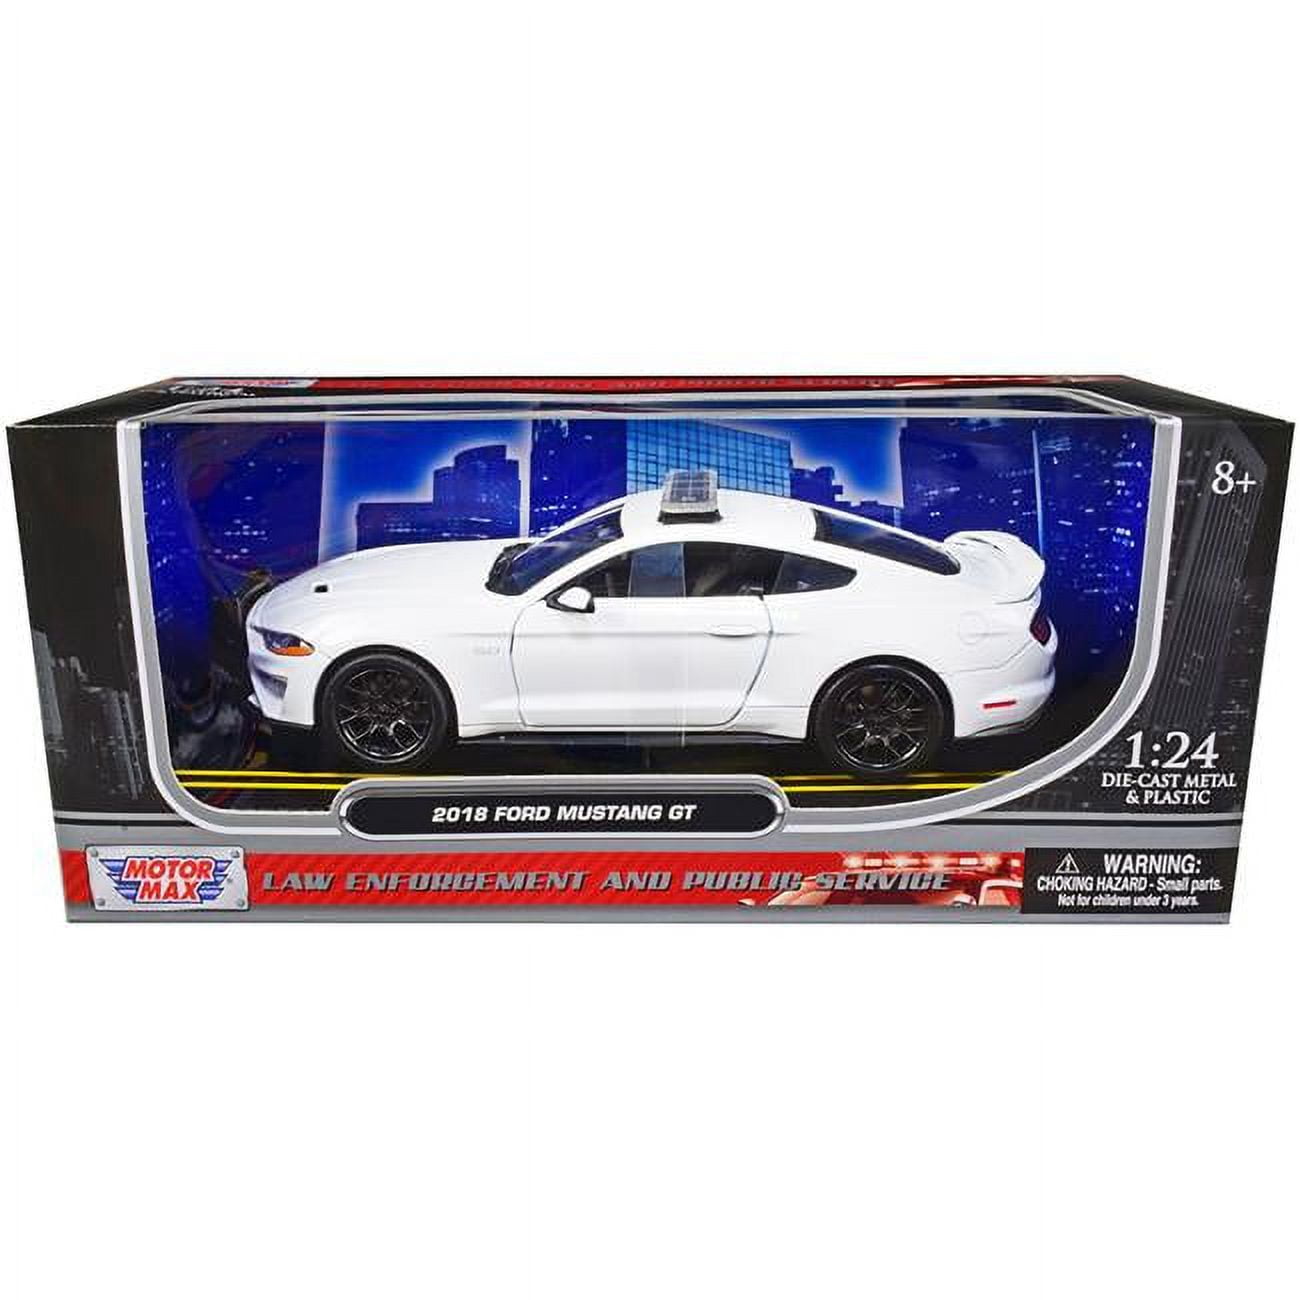 76979w Unmarked Plain White Law Enforcement & Public Service Series 1 by 24 Scale Diecast Model Car for 2018 Ford Mustang GT Police Car -  MOTORMAX